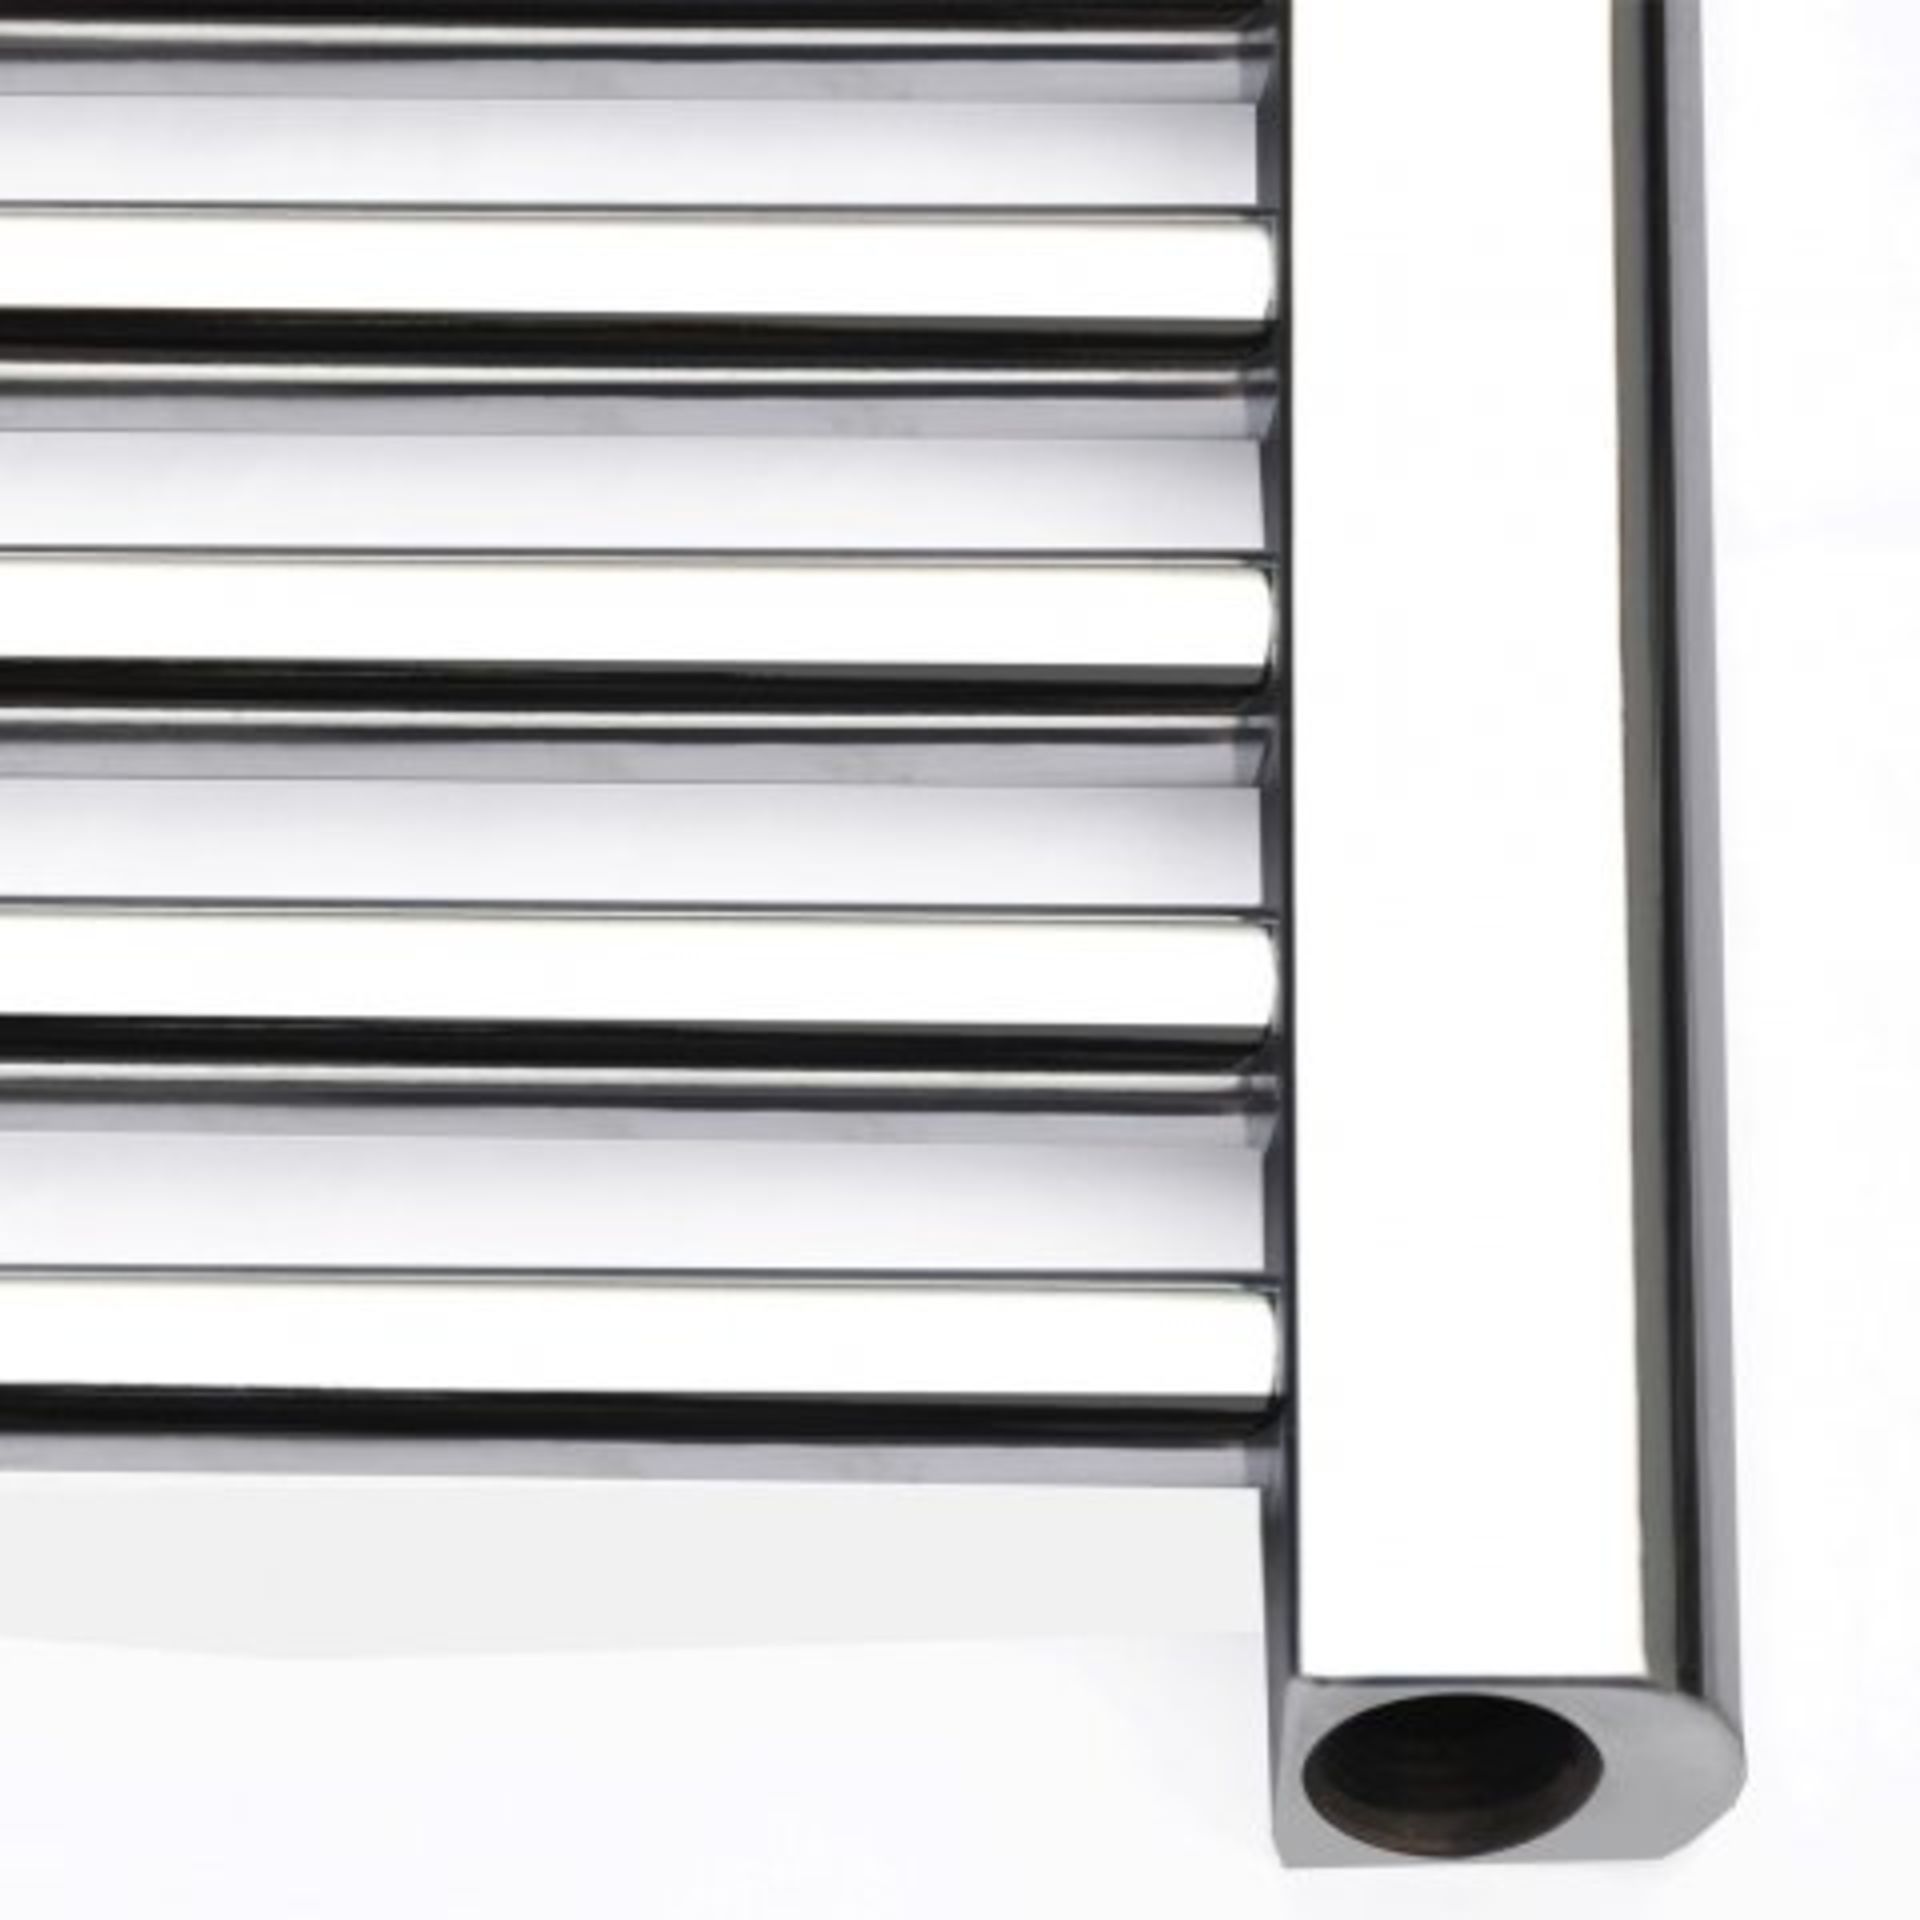 (L44) 1200x450mm - 25mm Tubes - Chrome Heated Straight Rail Ladder Towel Radiator Benefit from the - Image 7 of 8